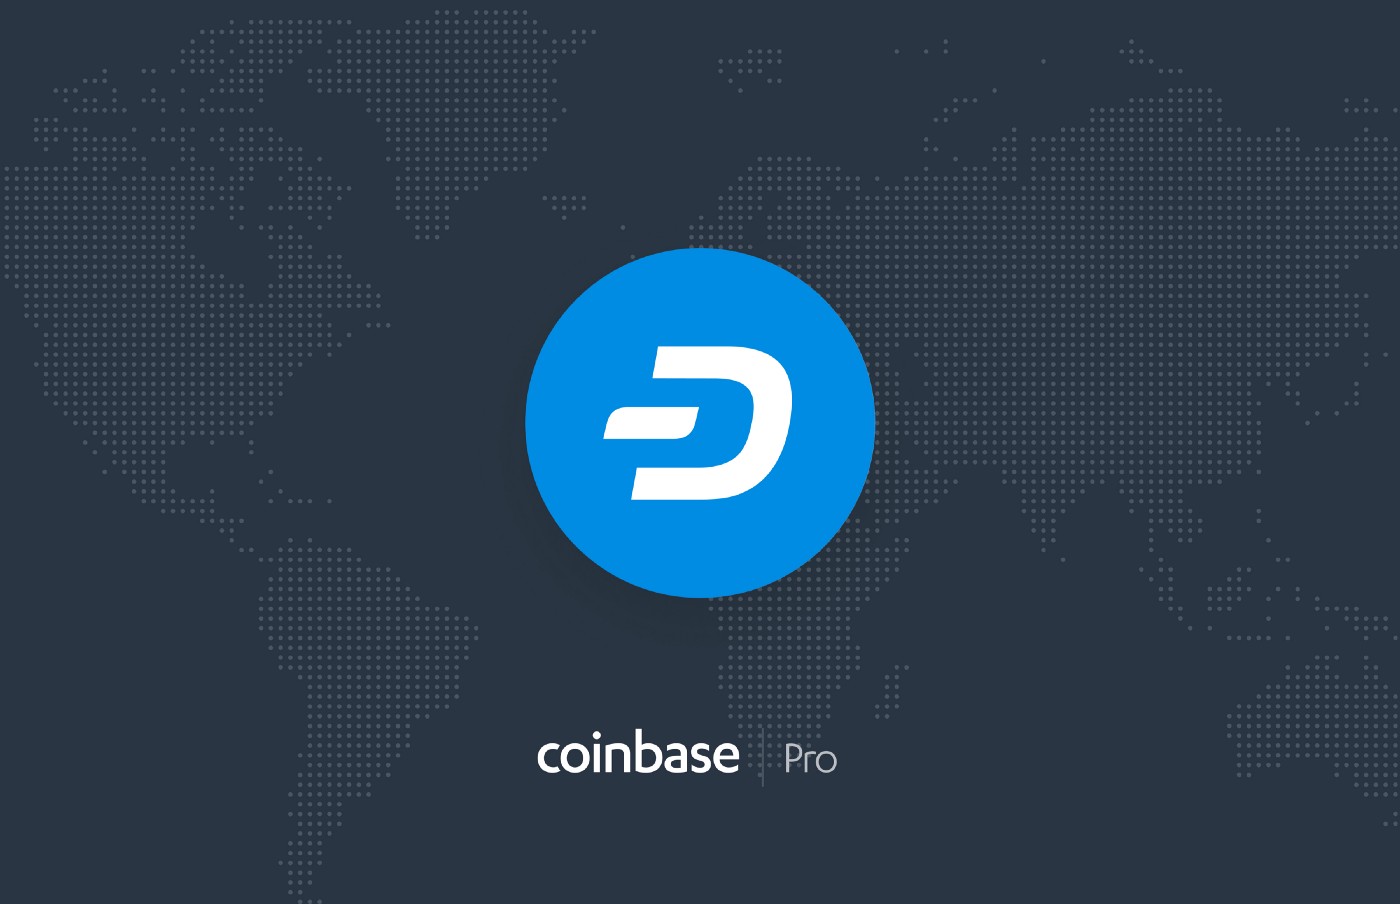 Coinbase Plans to List New Eight Cryptocurrencies, Including Dash